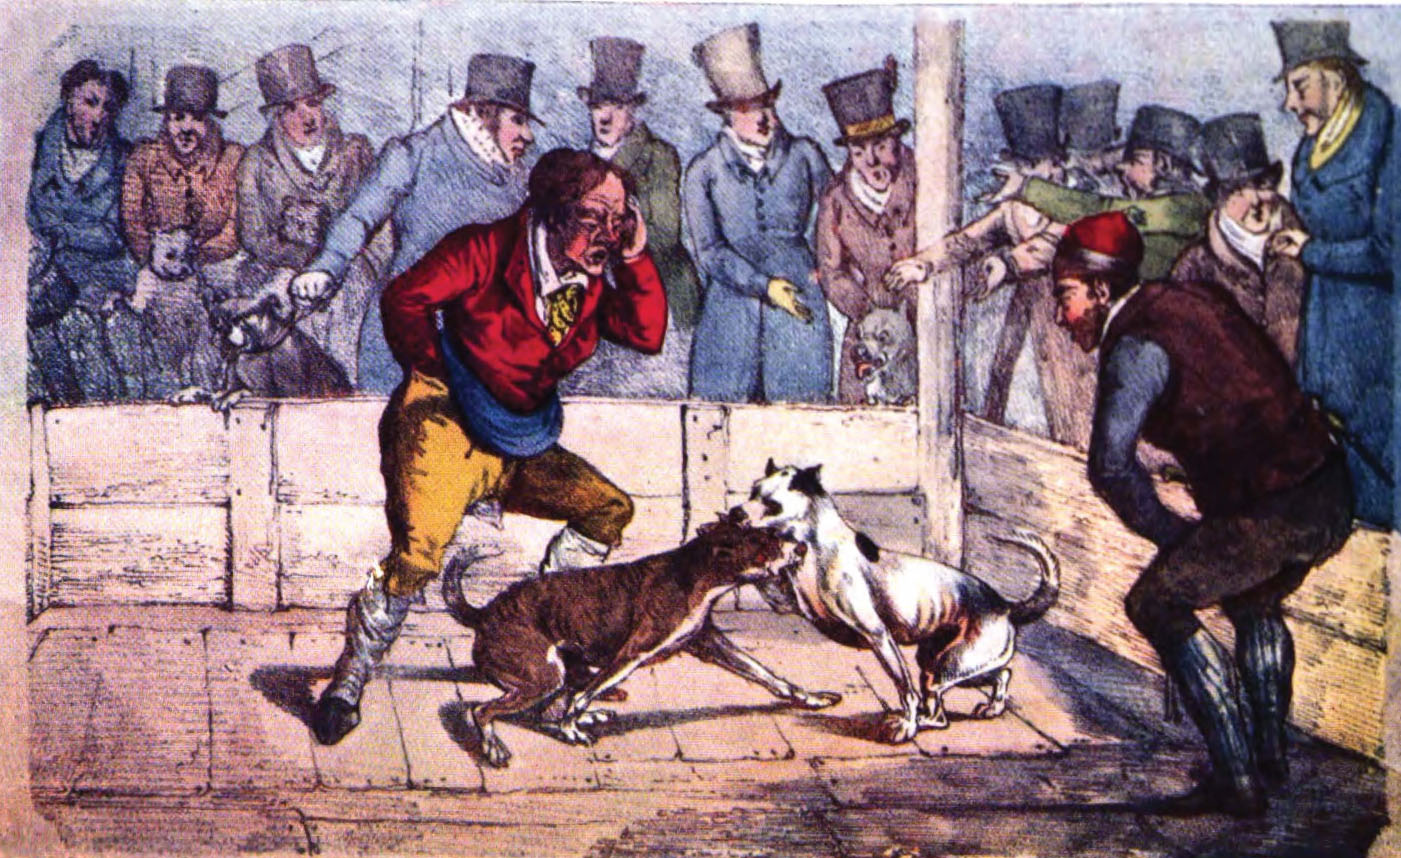 Dog Law Reporter: The Sordid History of Pit Bull Fighting in 19th Century  England